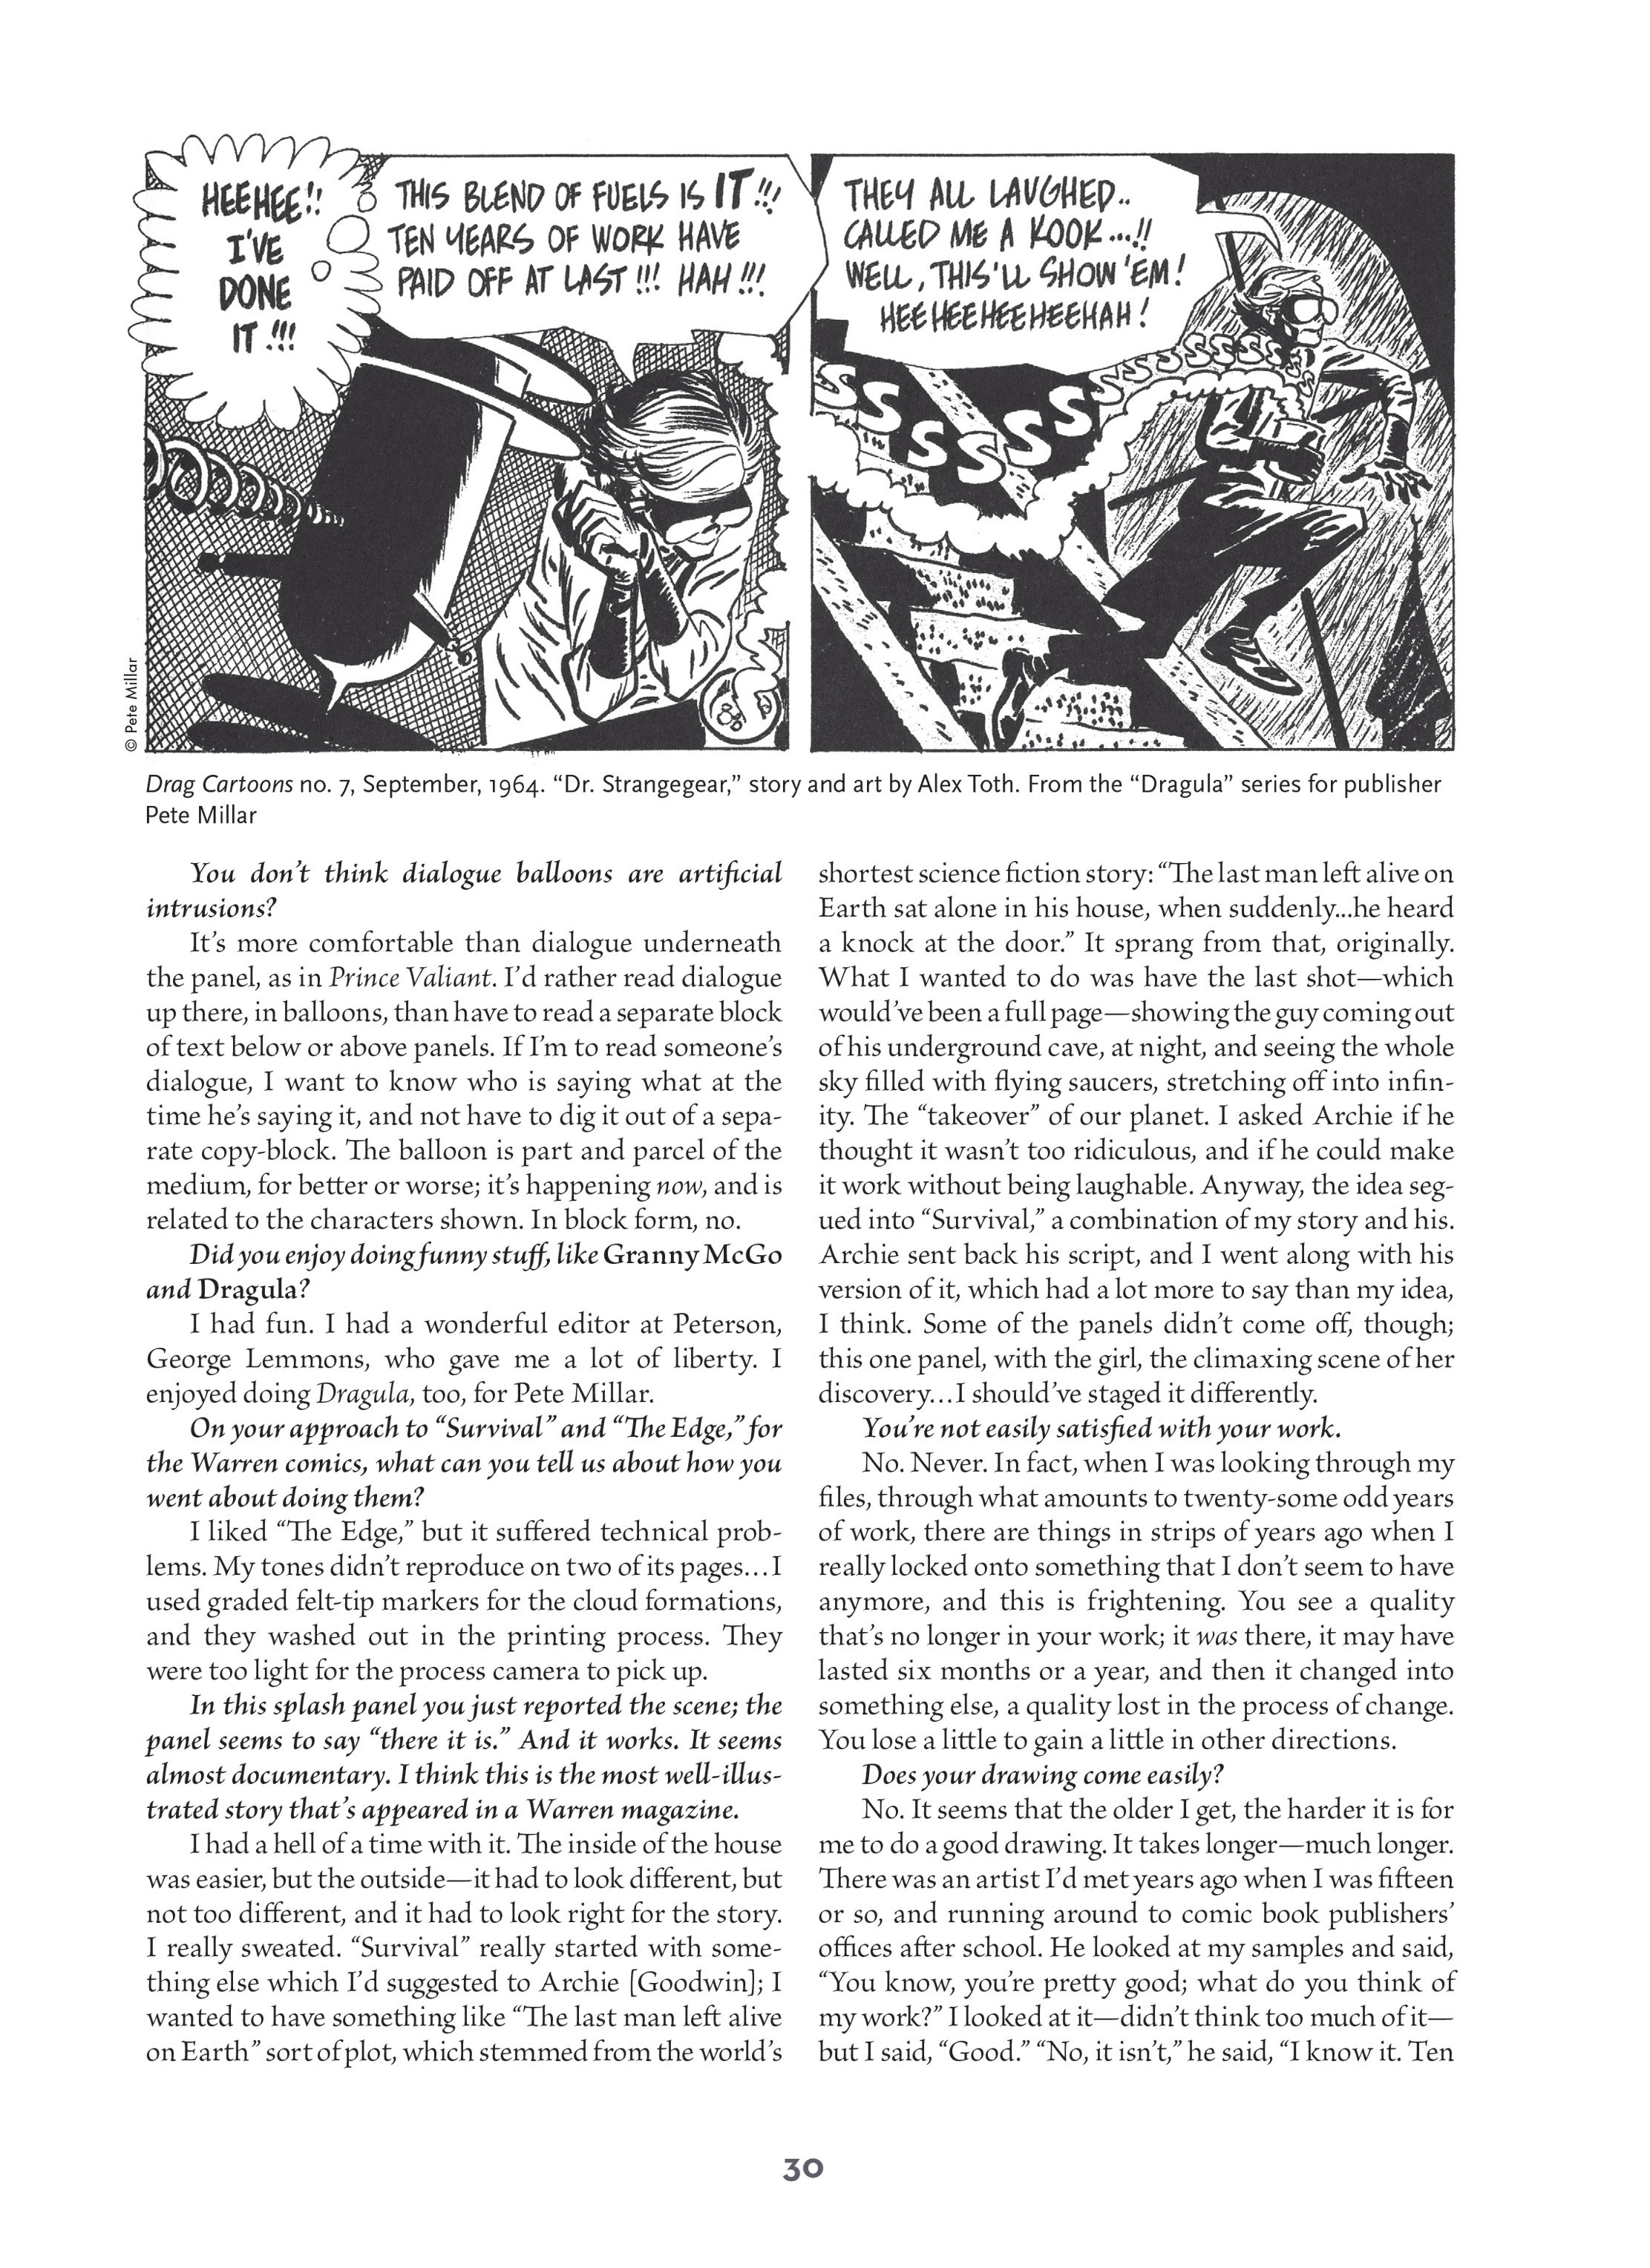 Read online Setting the Standard: Comics by Alex Toth 1952-1954 comic -  Issue # TPB (Part 1) - 29